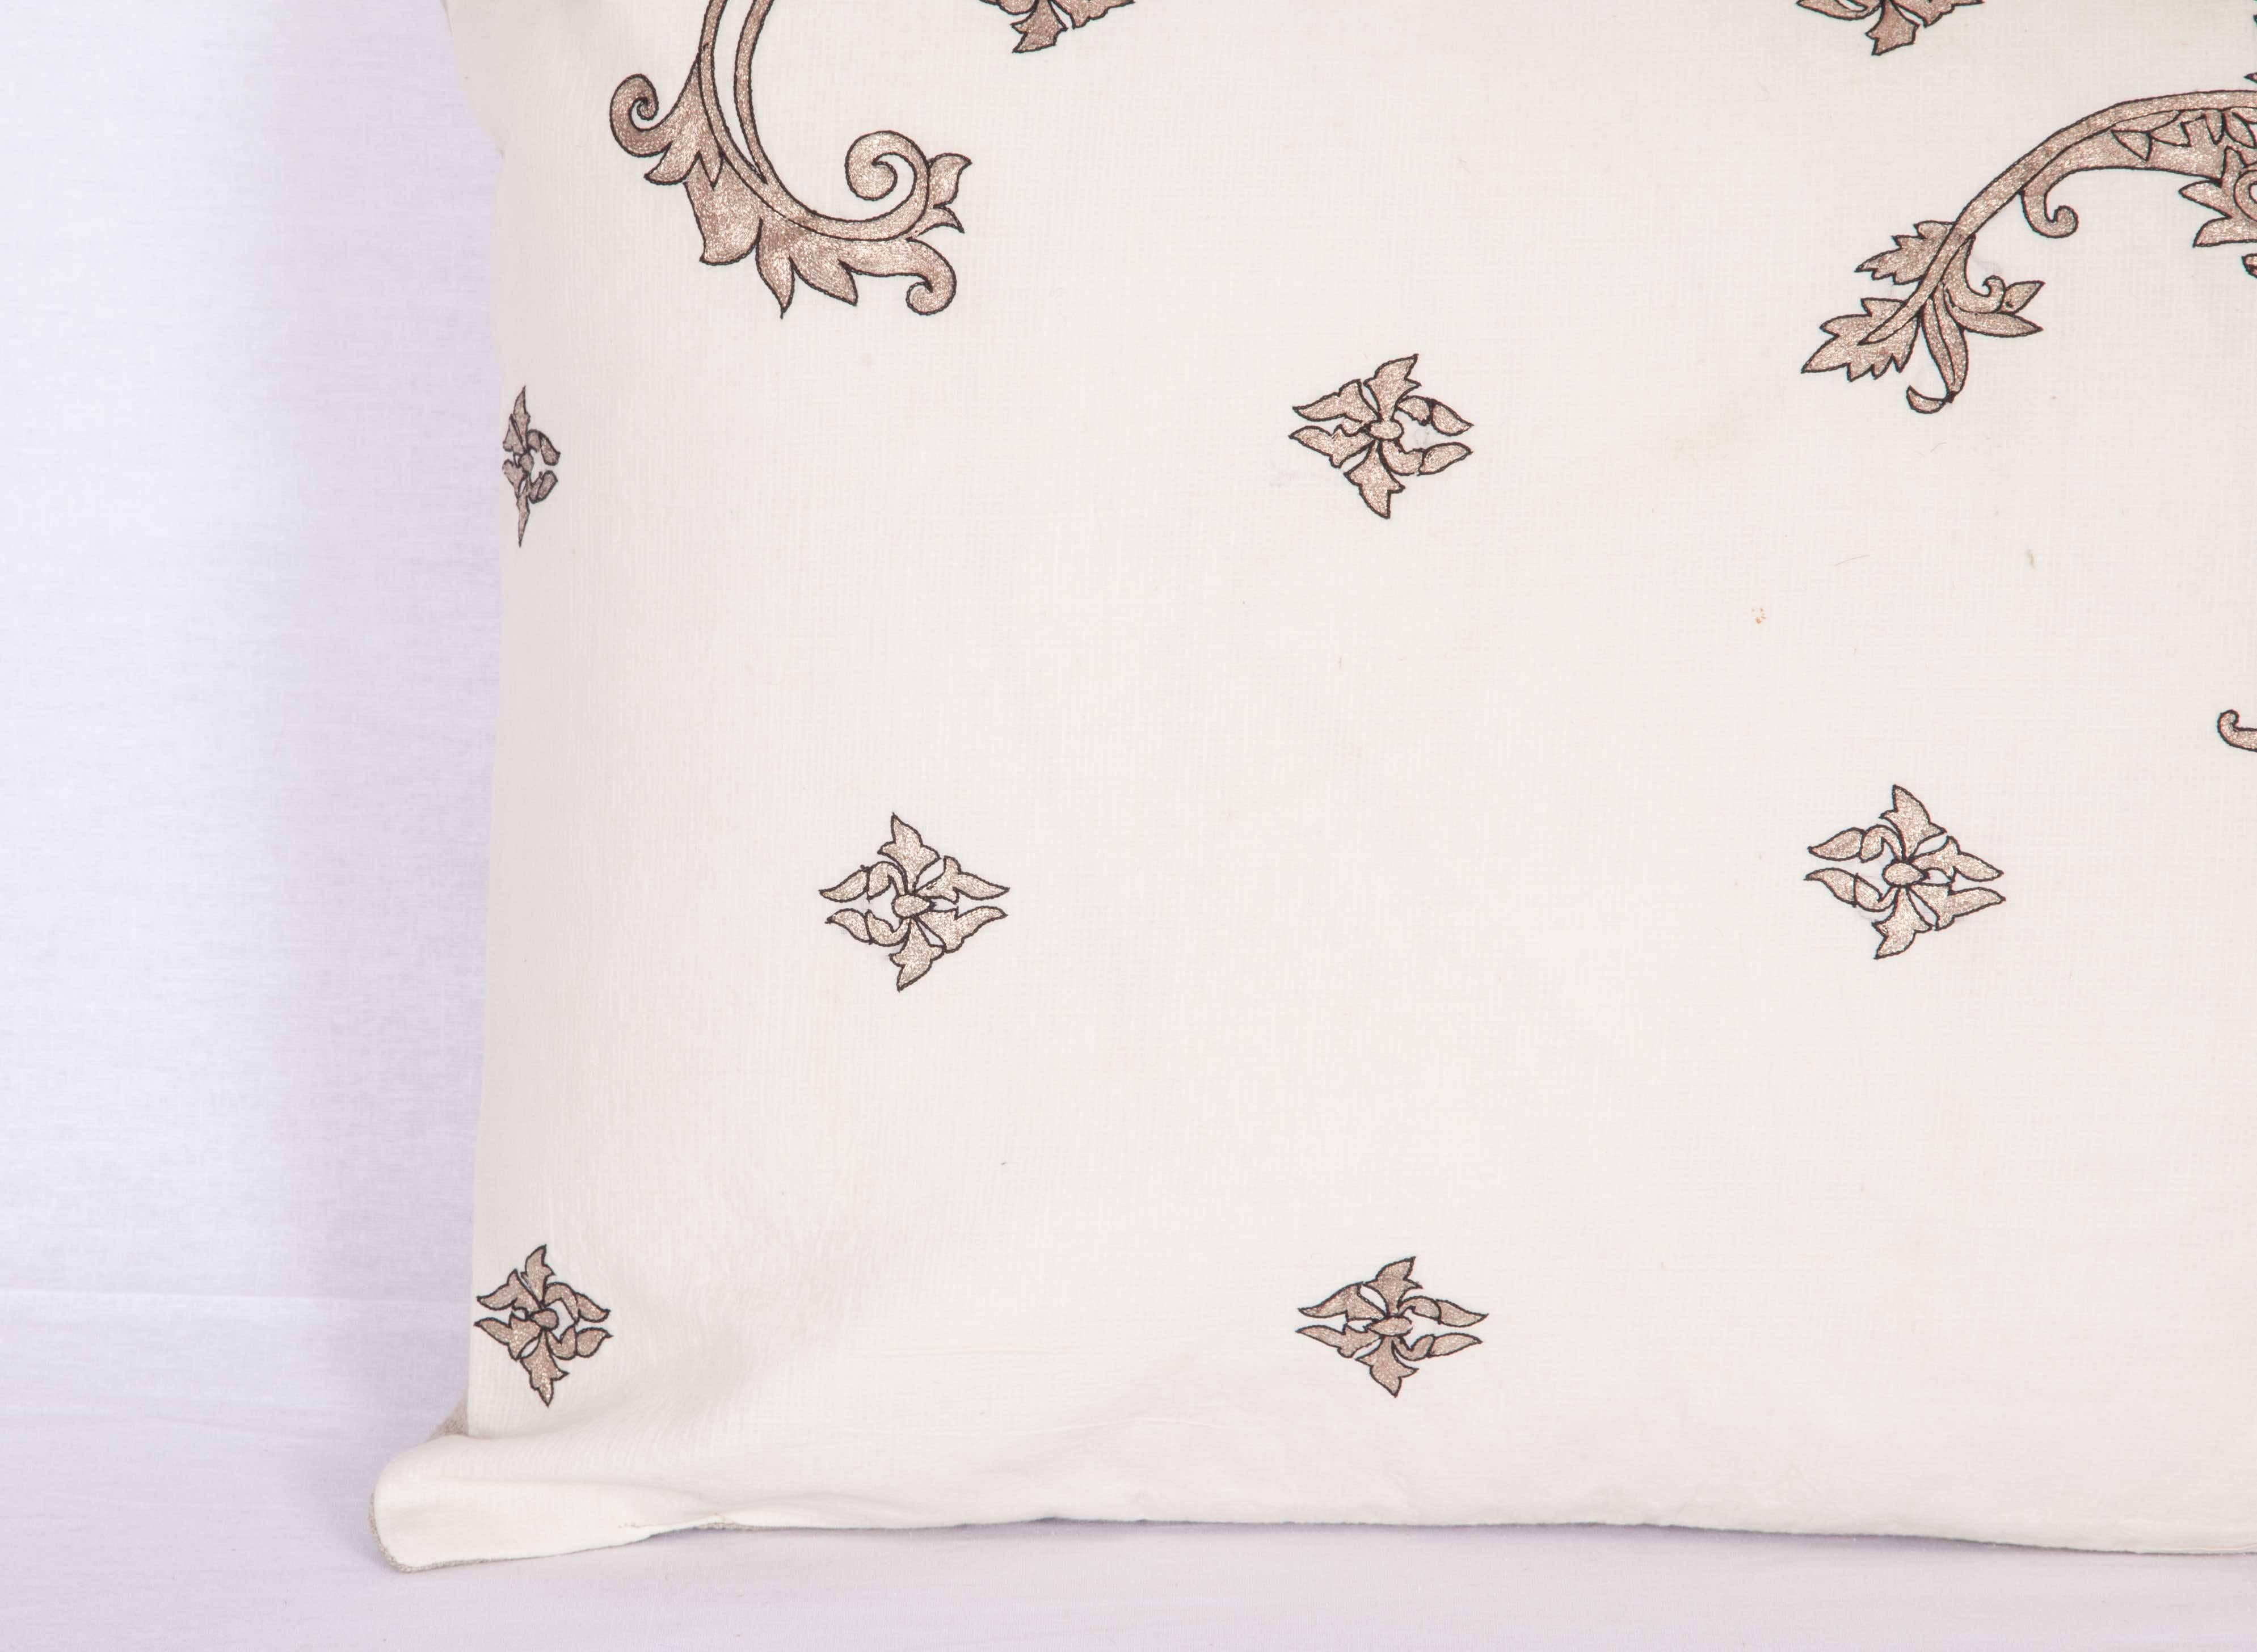 Italian Antique Pillow Made Out of a 19th Century or Earlier European Silver Embroidery